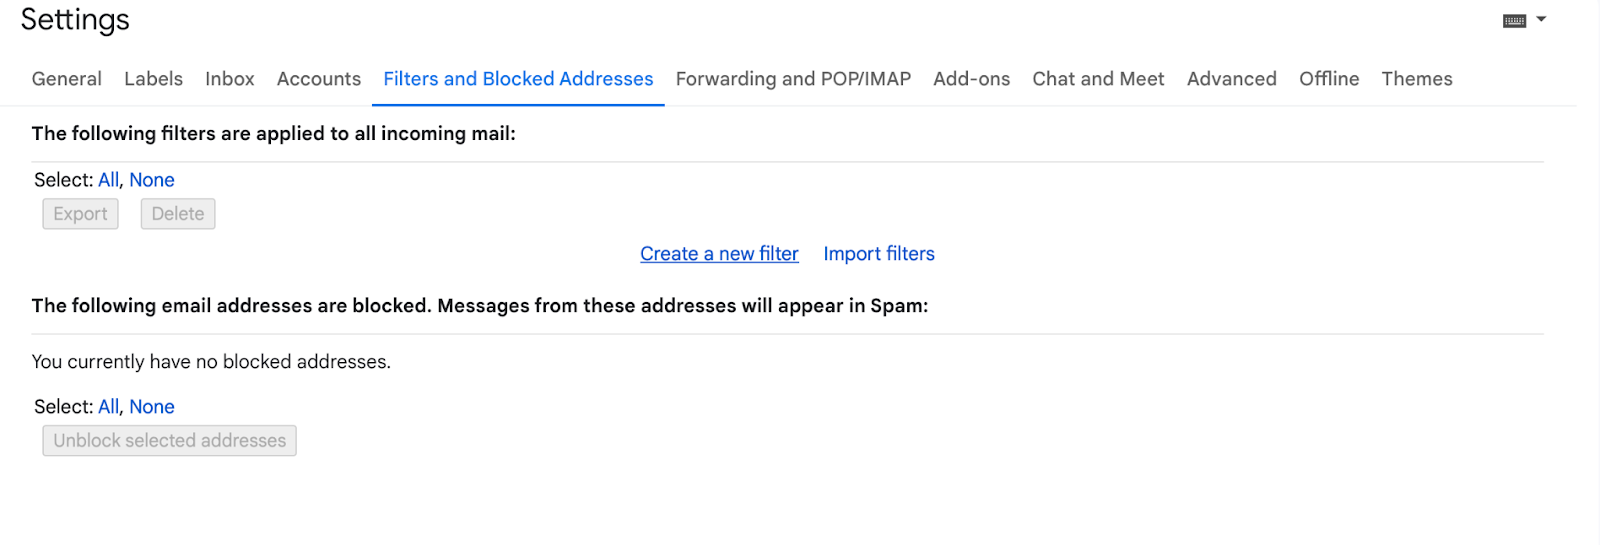 Creating a new filter in Gmail 